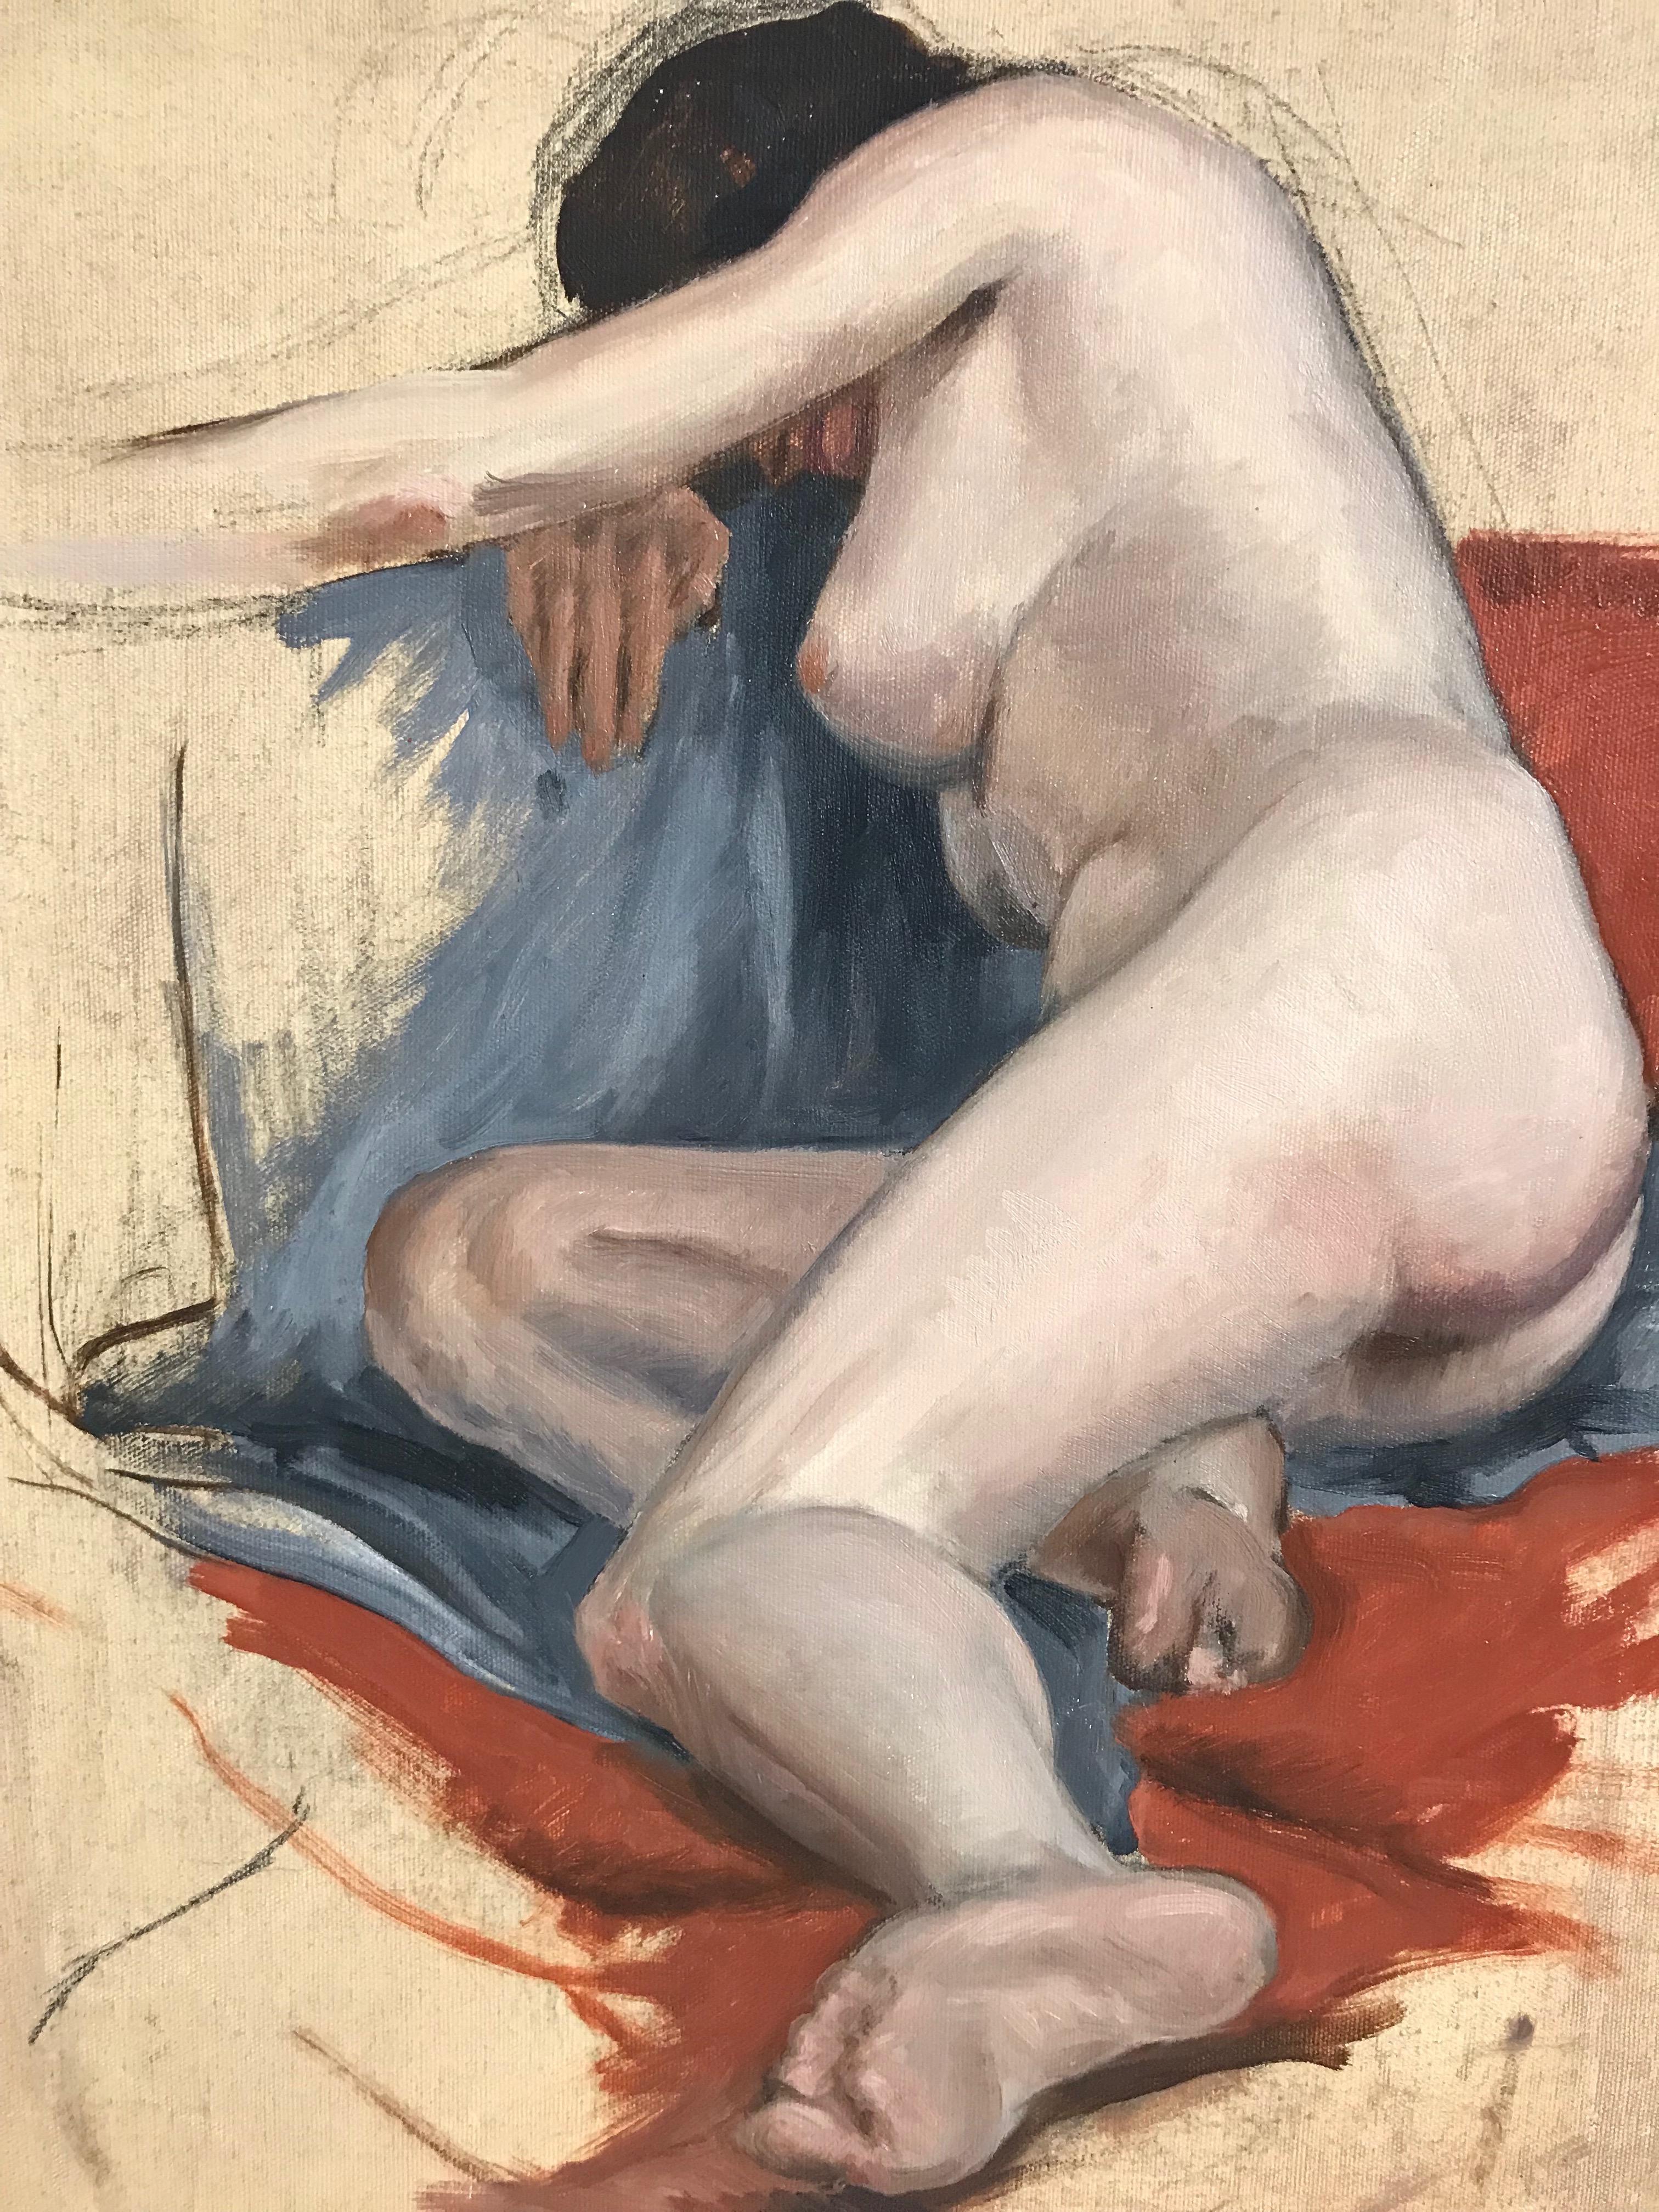 A nude study painted on canvas, unframed, dated April 23rd 1938.